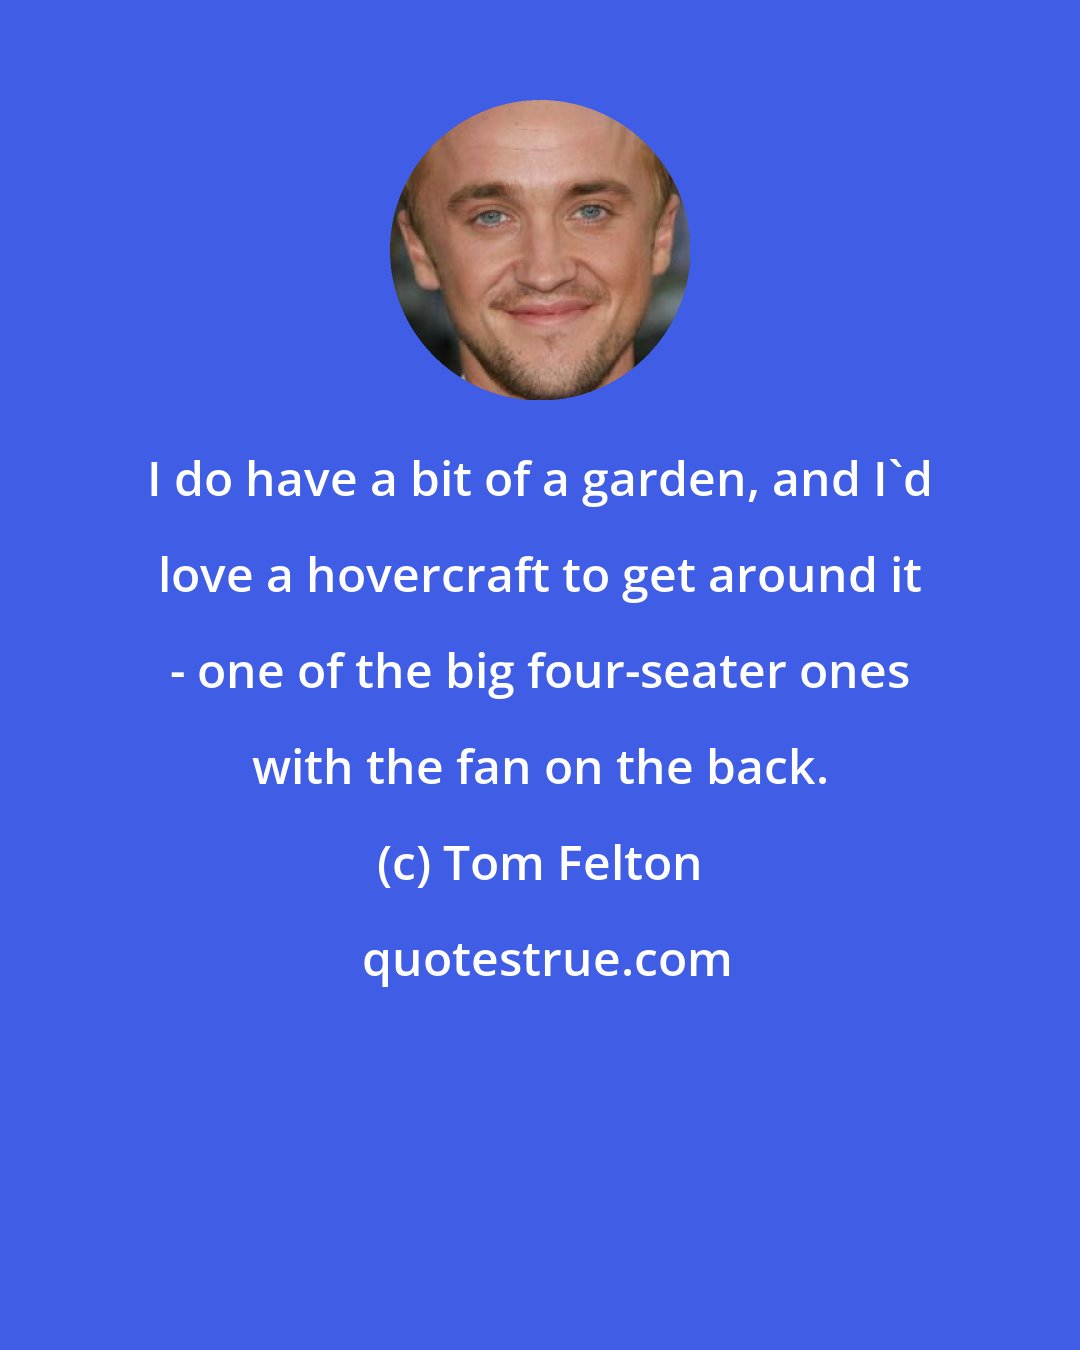 Tom Felton: I do have a bit of a garden, and I'd love a hovercraft to get around it - one of the big four-seater ones with the fan on the back.